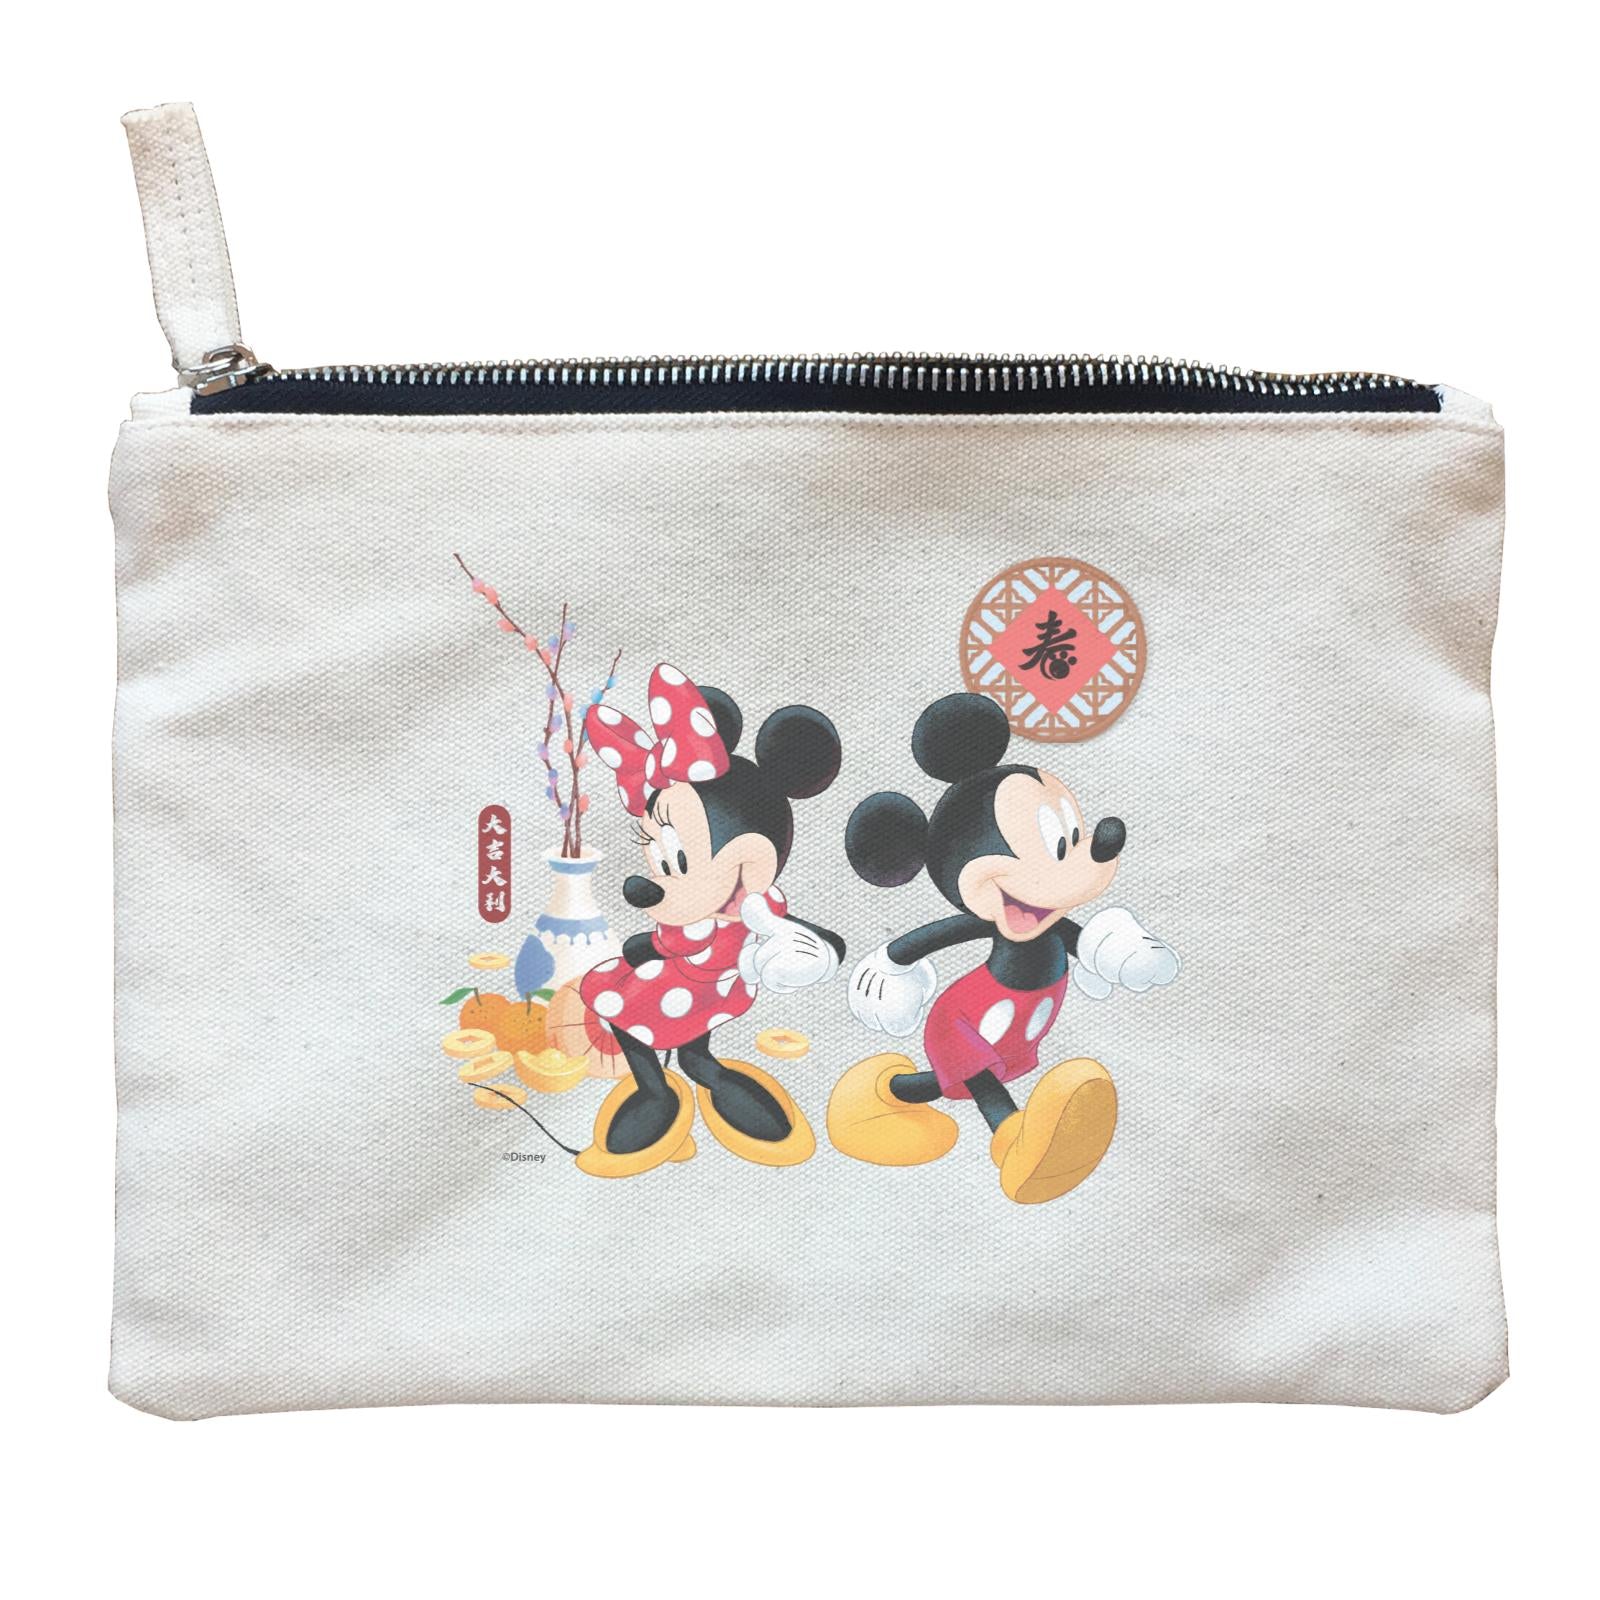 Disney CNY Mickey and Minnie With Prosperity Elements Non Personalised ZP Zipper Pouch